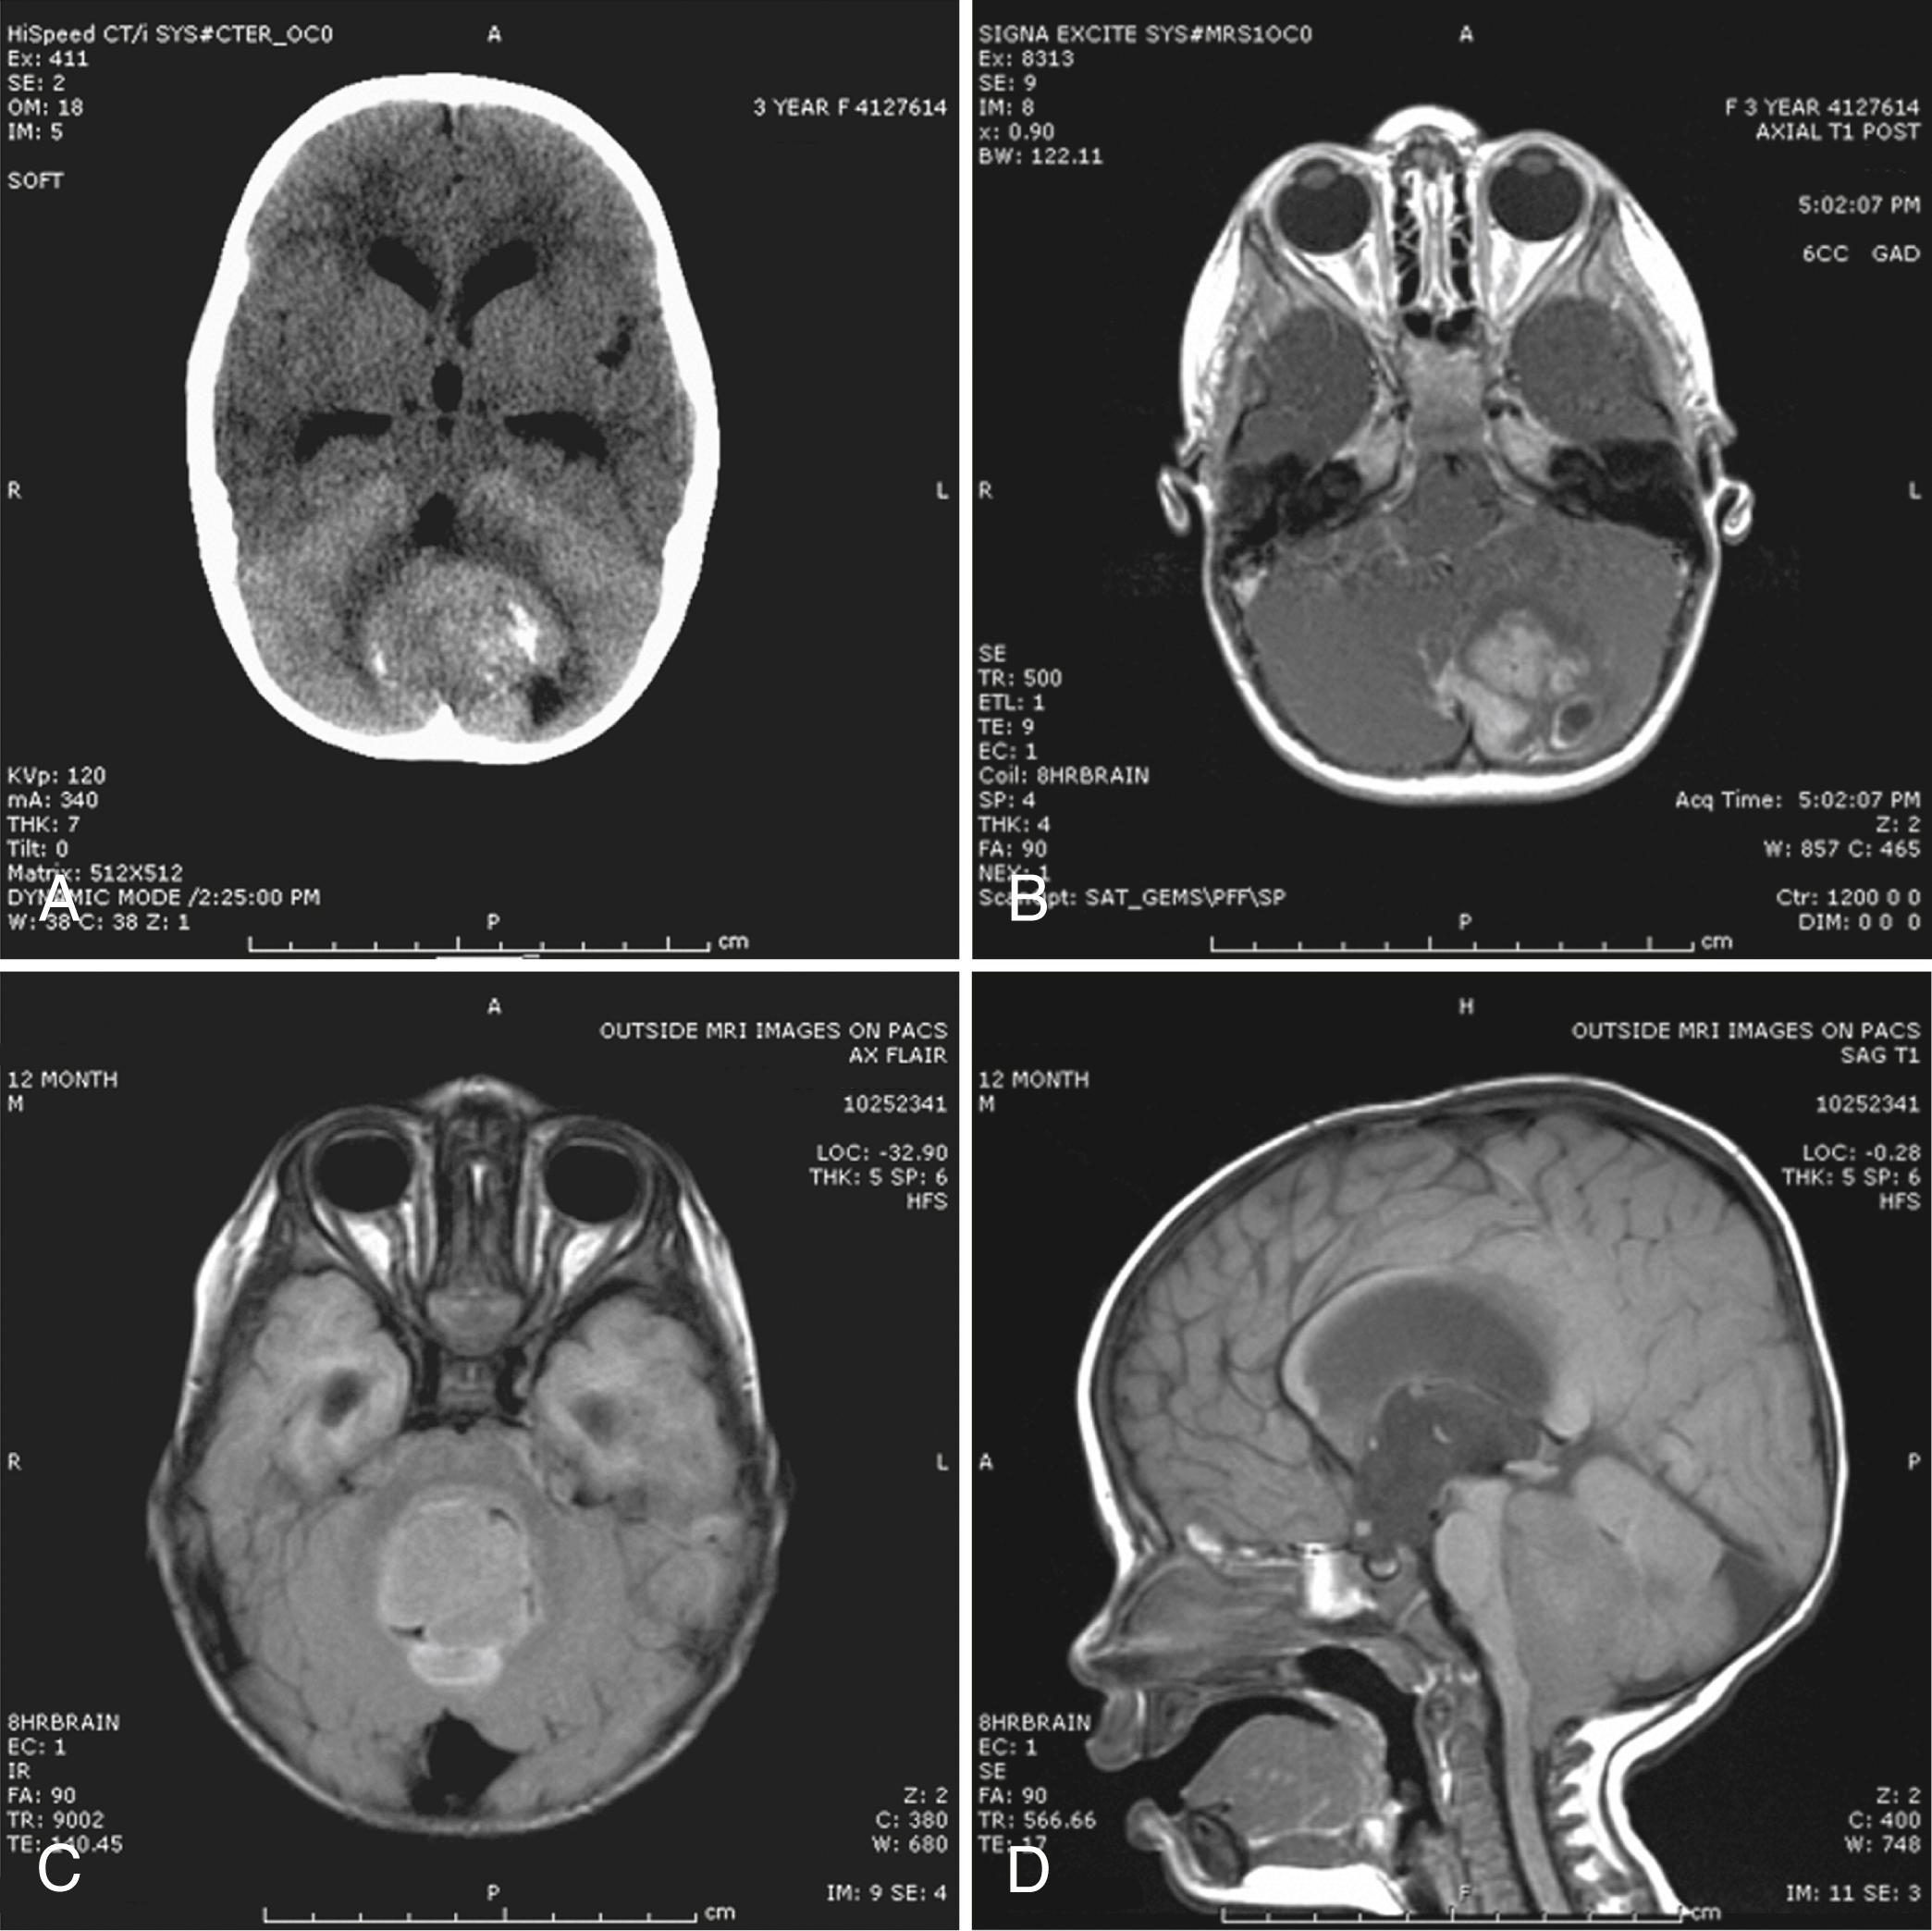 Fig. 75.1, A, A 3-year-old girl presented with 3 weeks of worsening headaches that awakened her at night. A contrast-enhanced cranial computed tomography (CT) scan shows a large dense mass within the posterior fossa, containing internal calcifications. Surrounding edema can be seen. Compression of the quadrigeminal plate cistern and fourth ventricle led to obstructive hydrocephalus. B, Axial T1 postcontrast magnetic resonance image (MRI) of the same patient, showing heterogeneous enhancement of the lesion. MR spectroscopy showed a markedly depressed N-acetylaspartate (NAA) peak, with elevation of the choline peak consistent with high-grade tumor. Diffusion-weighted imaging showed restricted diffusion indicative of a highly cellular lesion. Resection of the mass showed it to be a medulloblastoma. C, A 13-month-old child presented with unsteady gait and vomiting over several days. MRI showed a large nonenhancing posterior fossa mass filling the fourth ventricle. Resection showed tumor consistent with ependymoma. Axial T2 fluid-attenuated inversion recovery (FLAIR) image shows T2 prolongation. D, Sagittal T1 image showing the ependymoma filling the fourth ventricle. The lesion extends out of the foramen of Magendie over the dorsal surface of the cervical spinal cord.